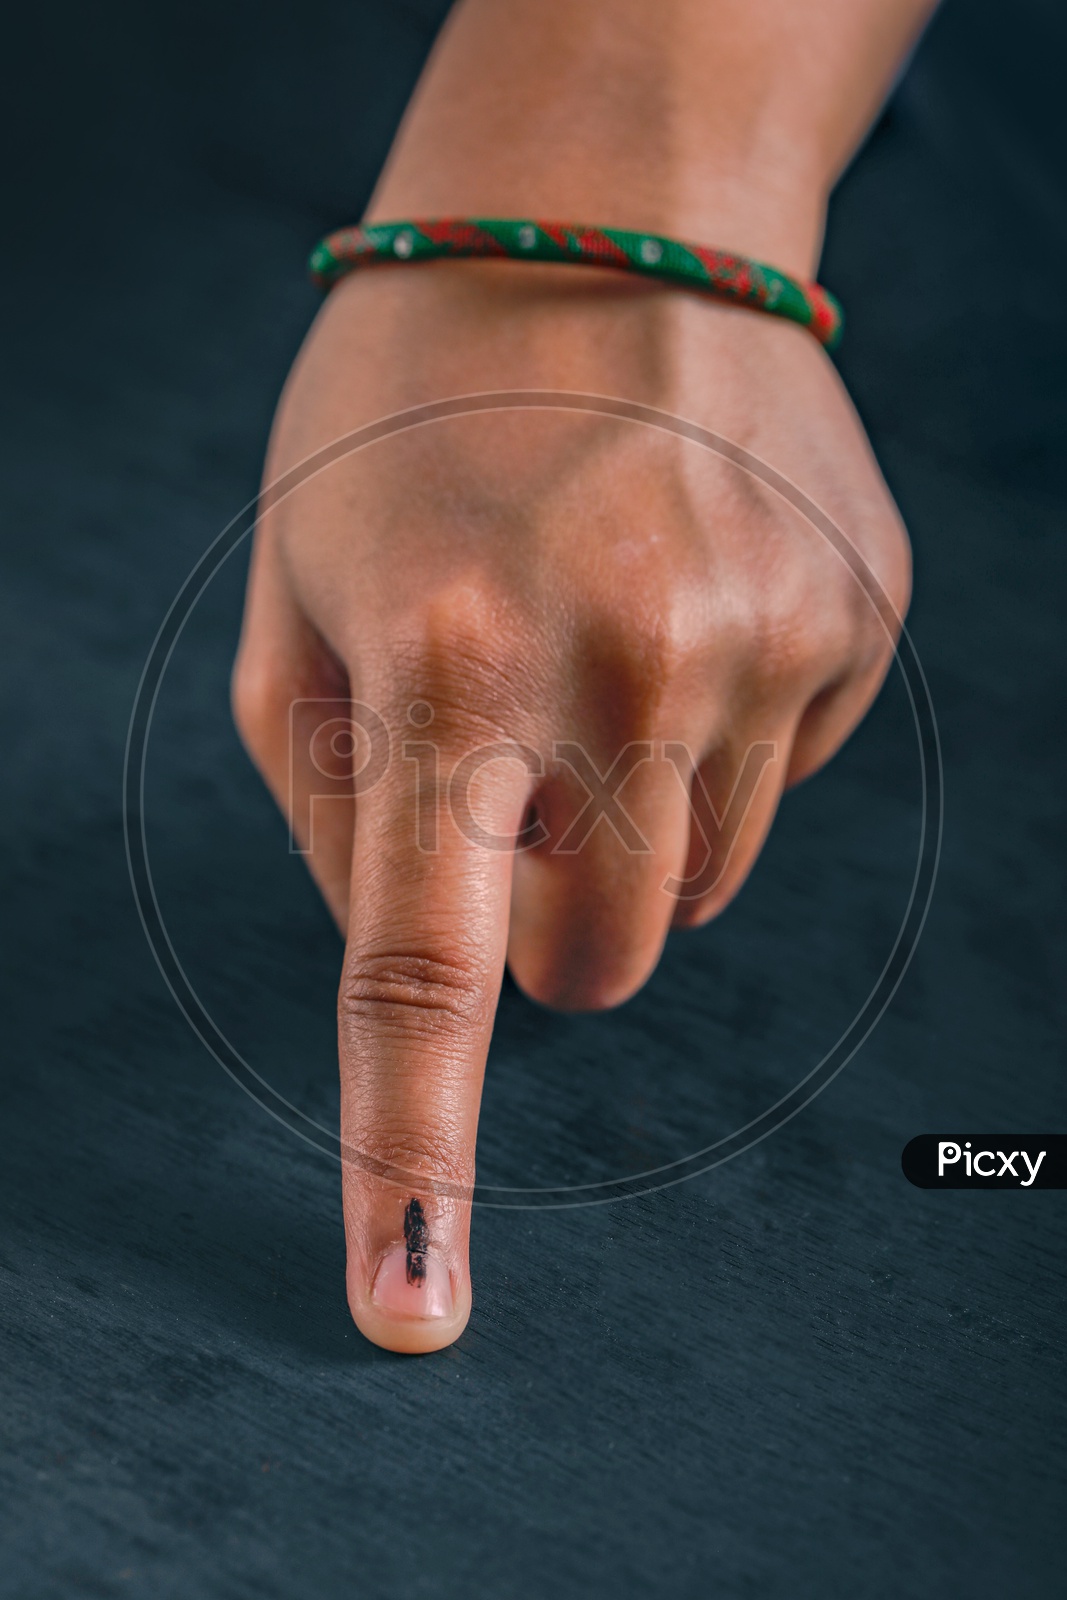 Woman Voter  Showing Inked Finger After Casting Vote in Indian Elections  Hands Closeup